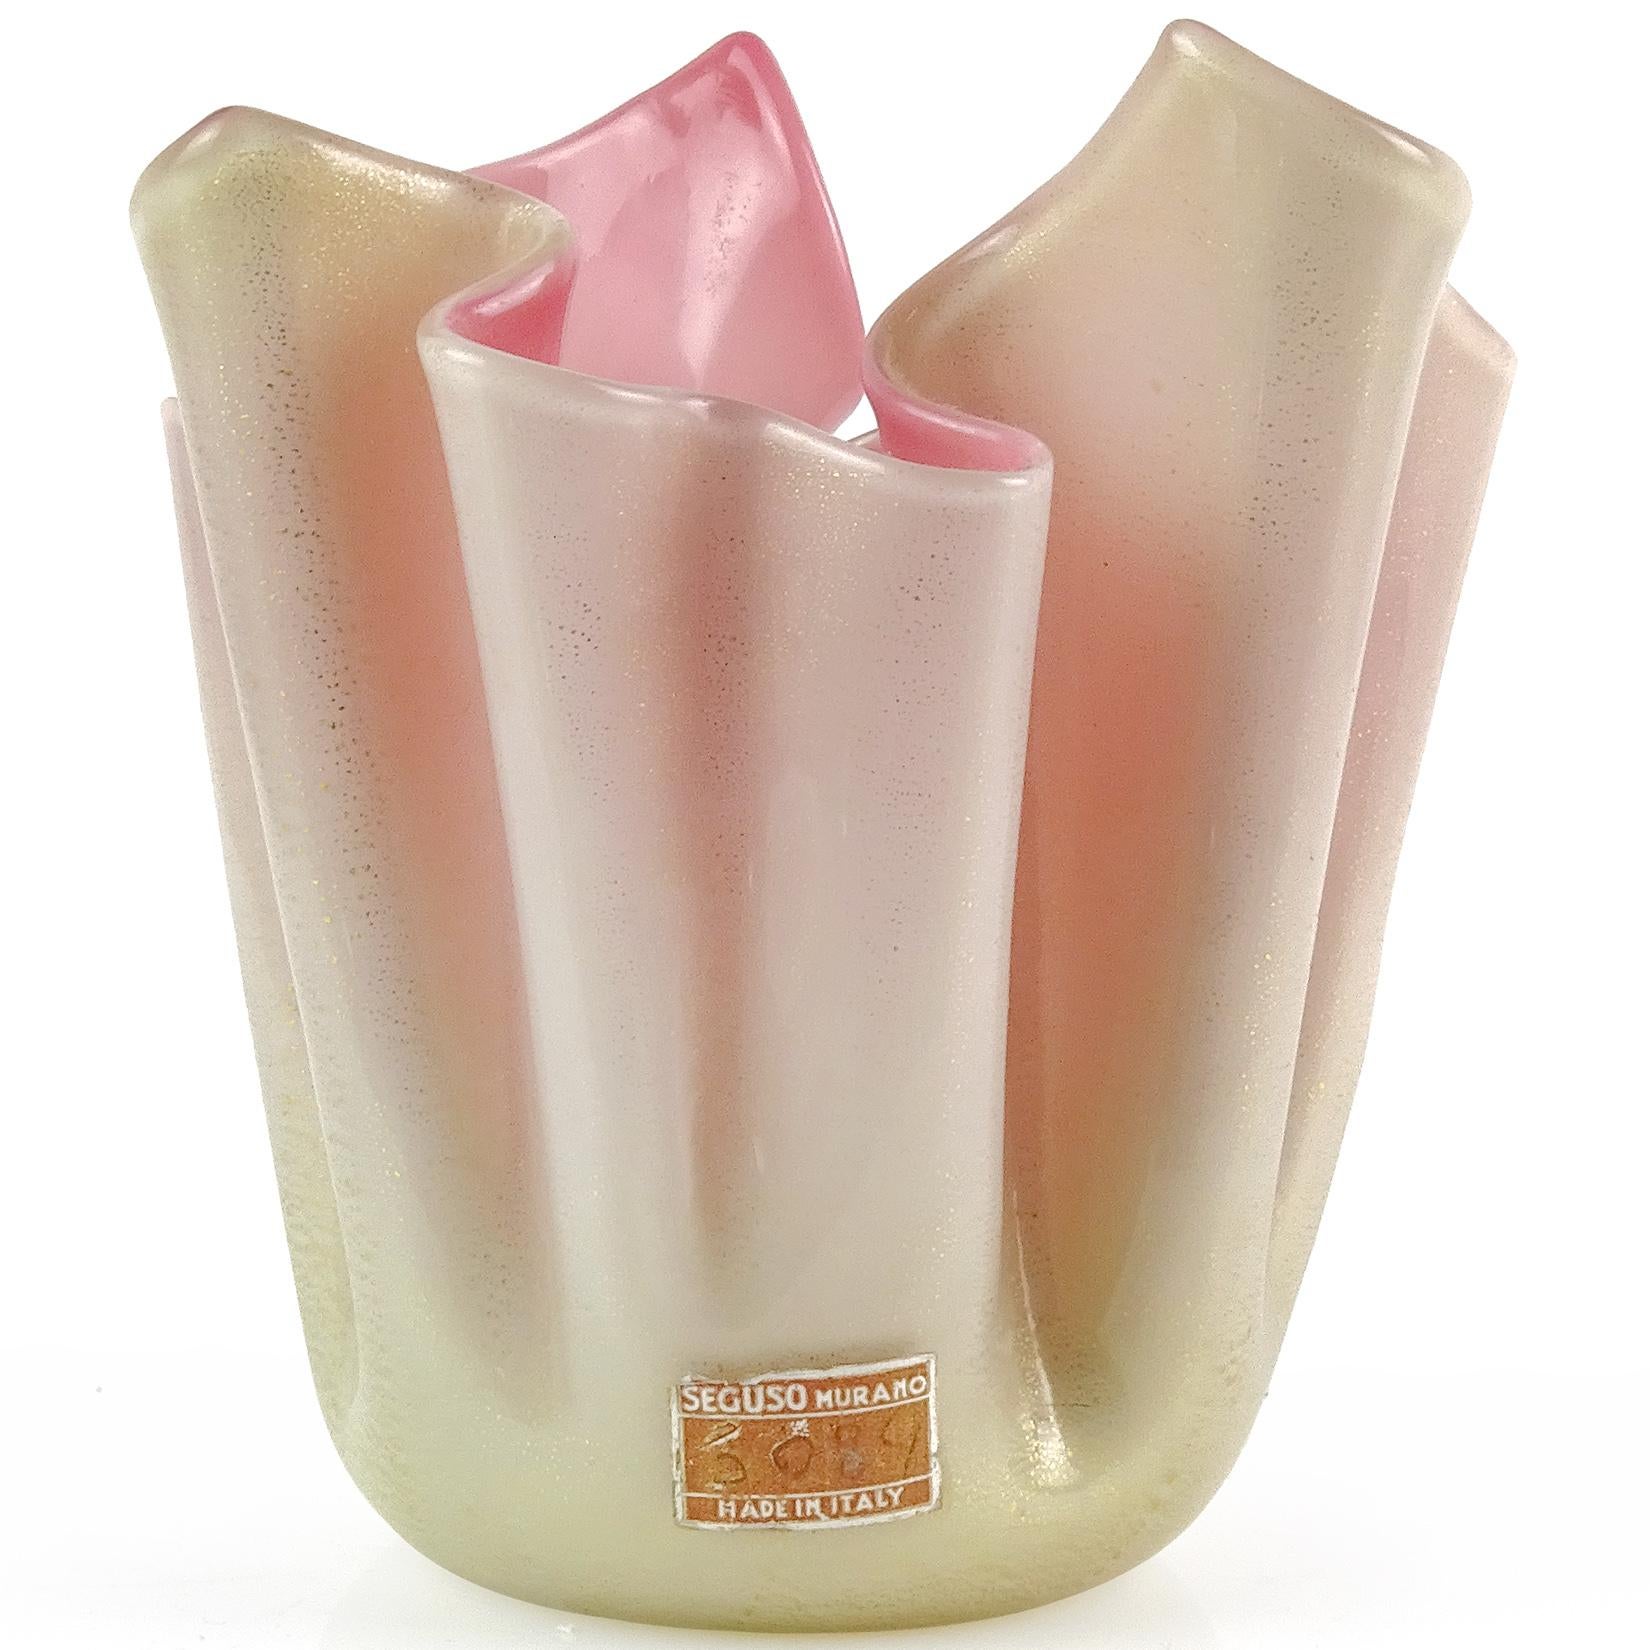 Beautiful vintage Murano hand blown white over pink, and gold flecks Italian art glass sculptural fazzoletto vase. Documented to the Seguso Vetri d'Arte company, with the original label still attached (used from 1940s-early 1960s). It is profusely